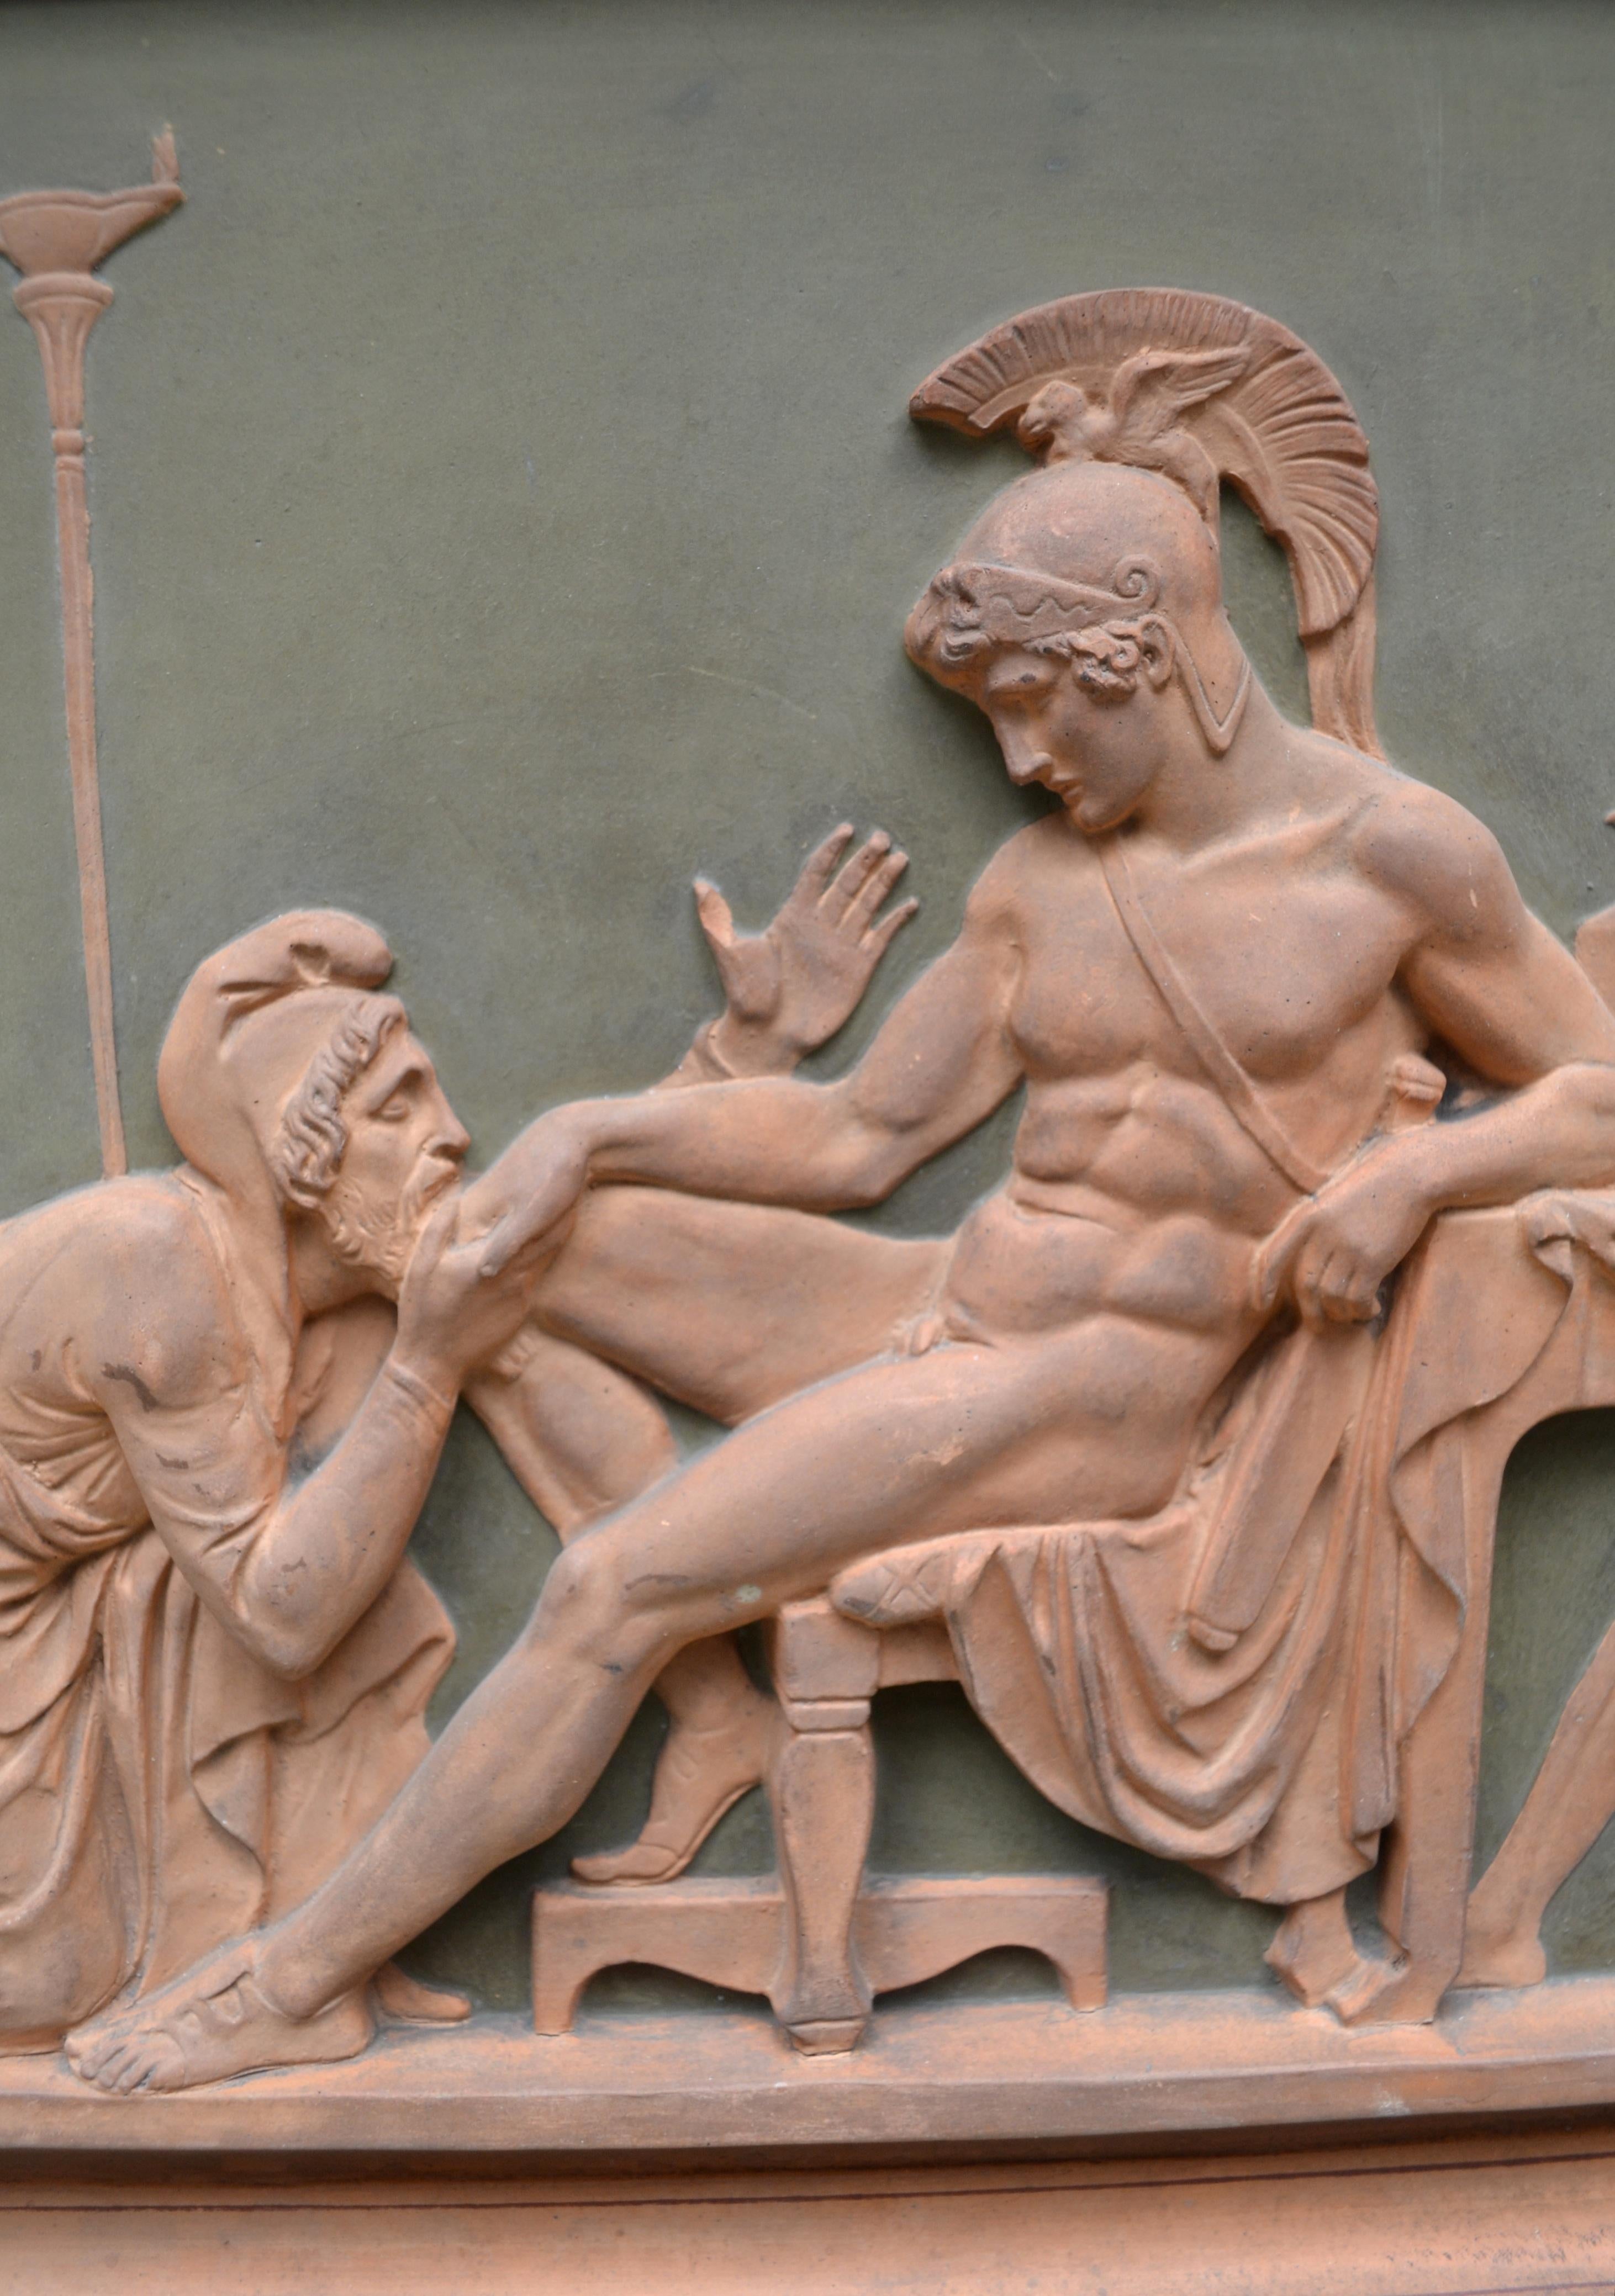 A finely modeled terracotta neoclassical wall relief depicting a work by Bertel Thorvaldsen called ‘Priam Pleads with Achilles for Hector’s Body’, after Thorvaldsen’s original plaster model of 1815.

The terracotta plaque is stamped on the back